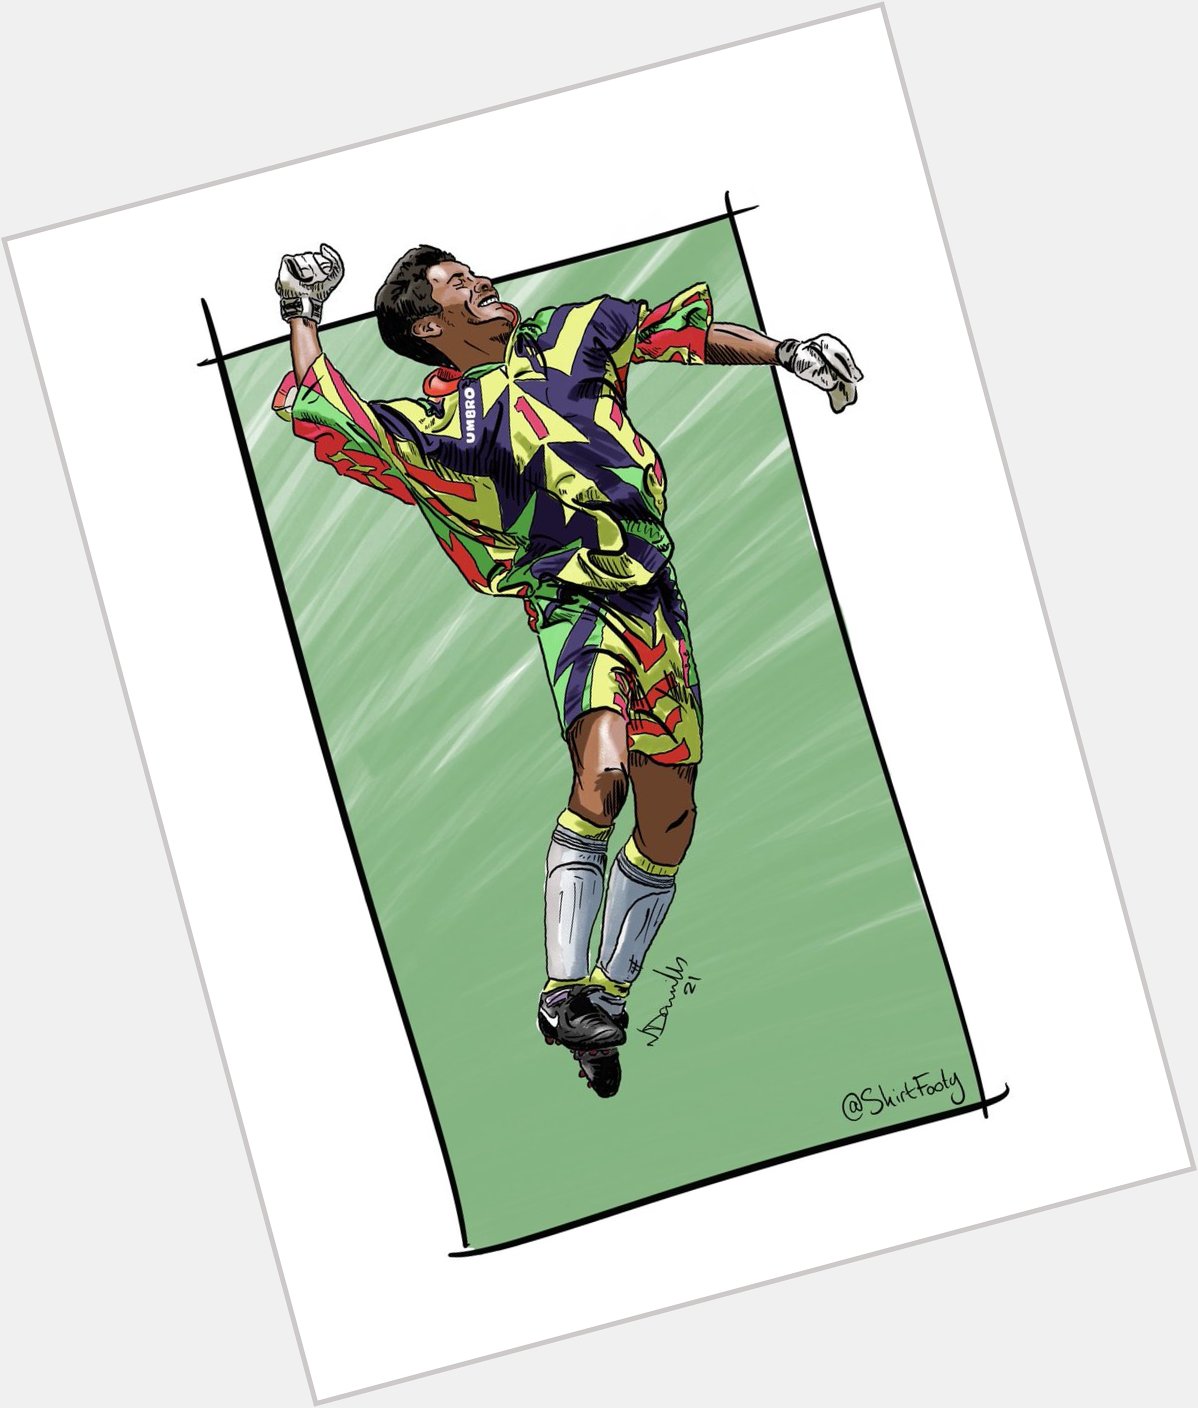 Happy Birthday Jorge Campos!!
Has there ever been a more flamboyant goalkeeper?? 